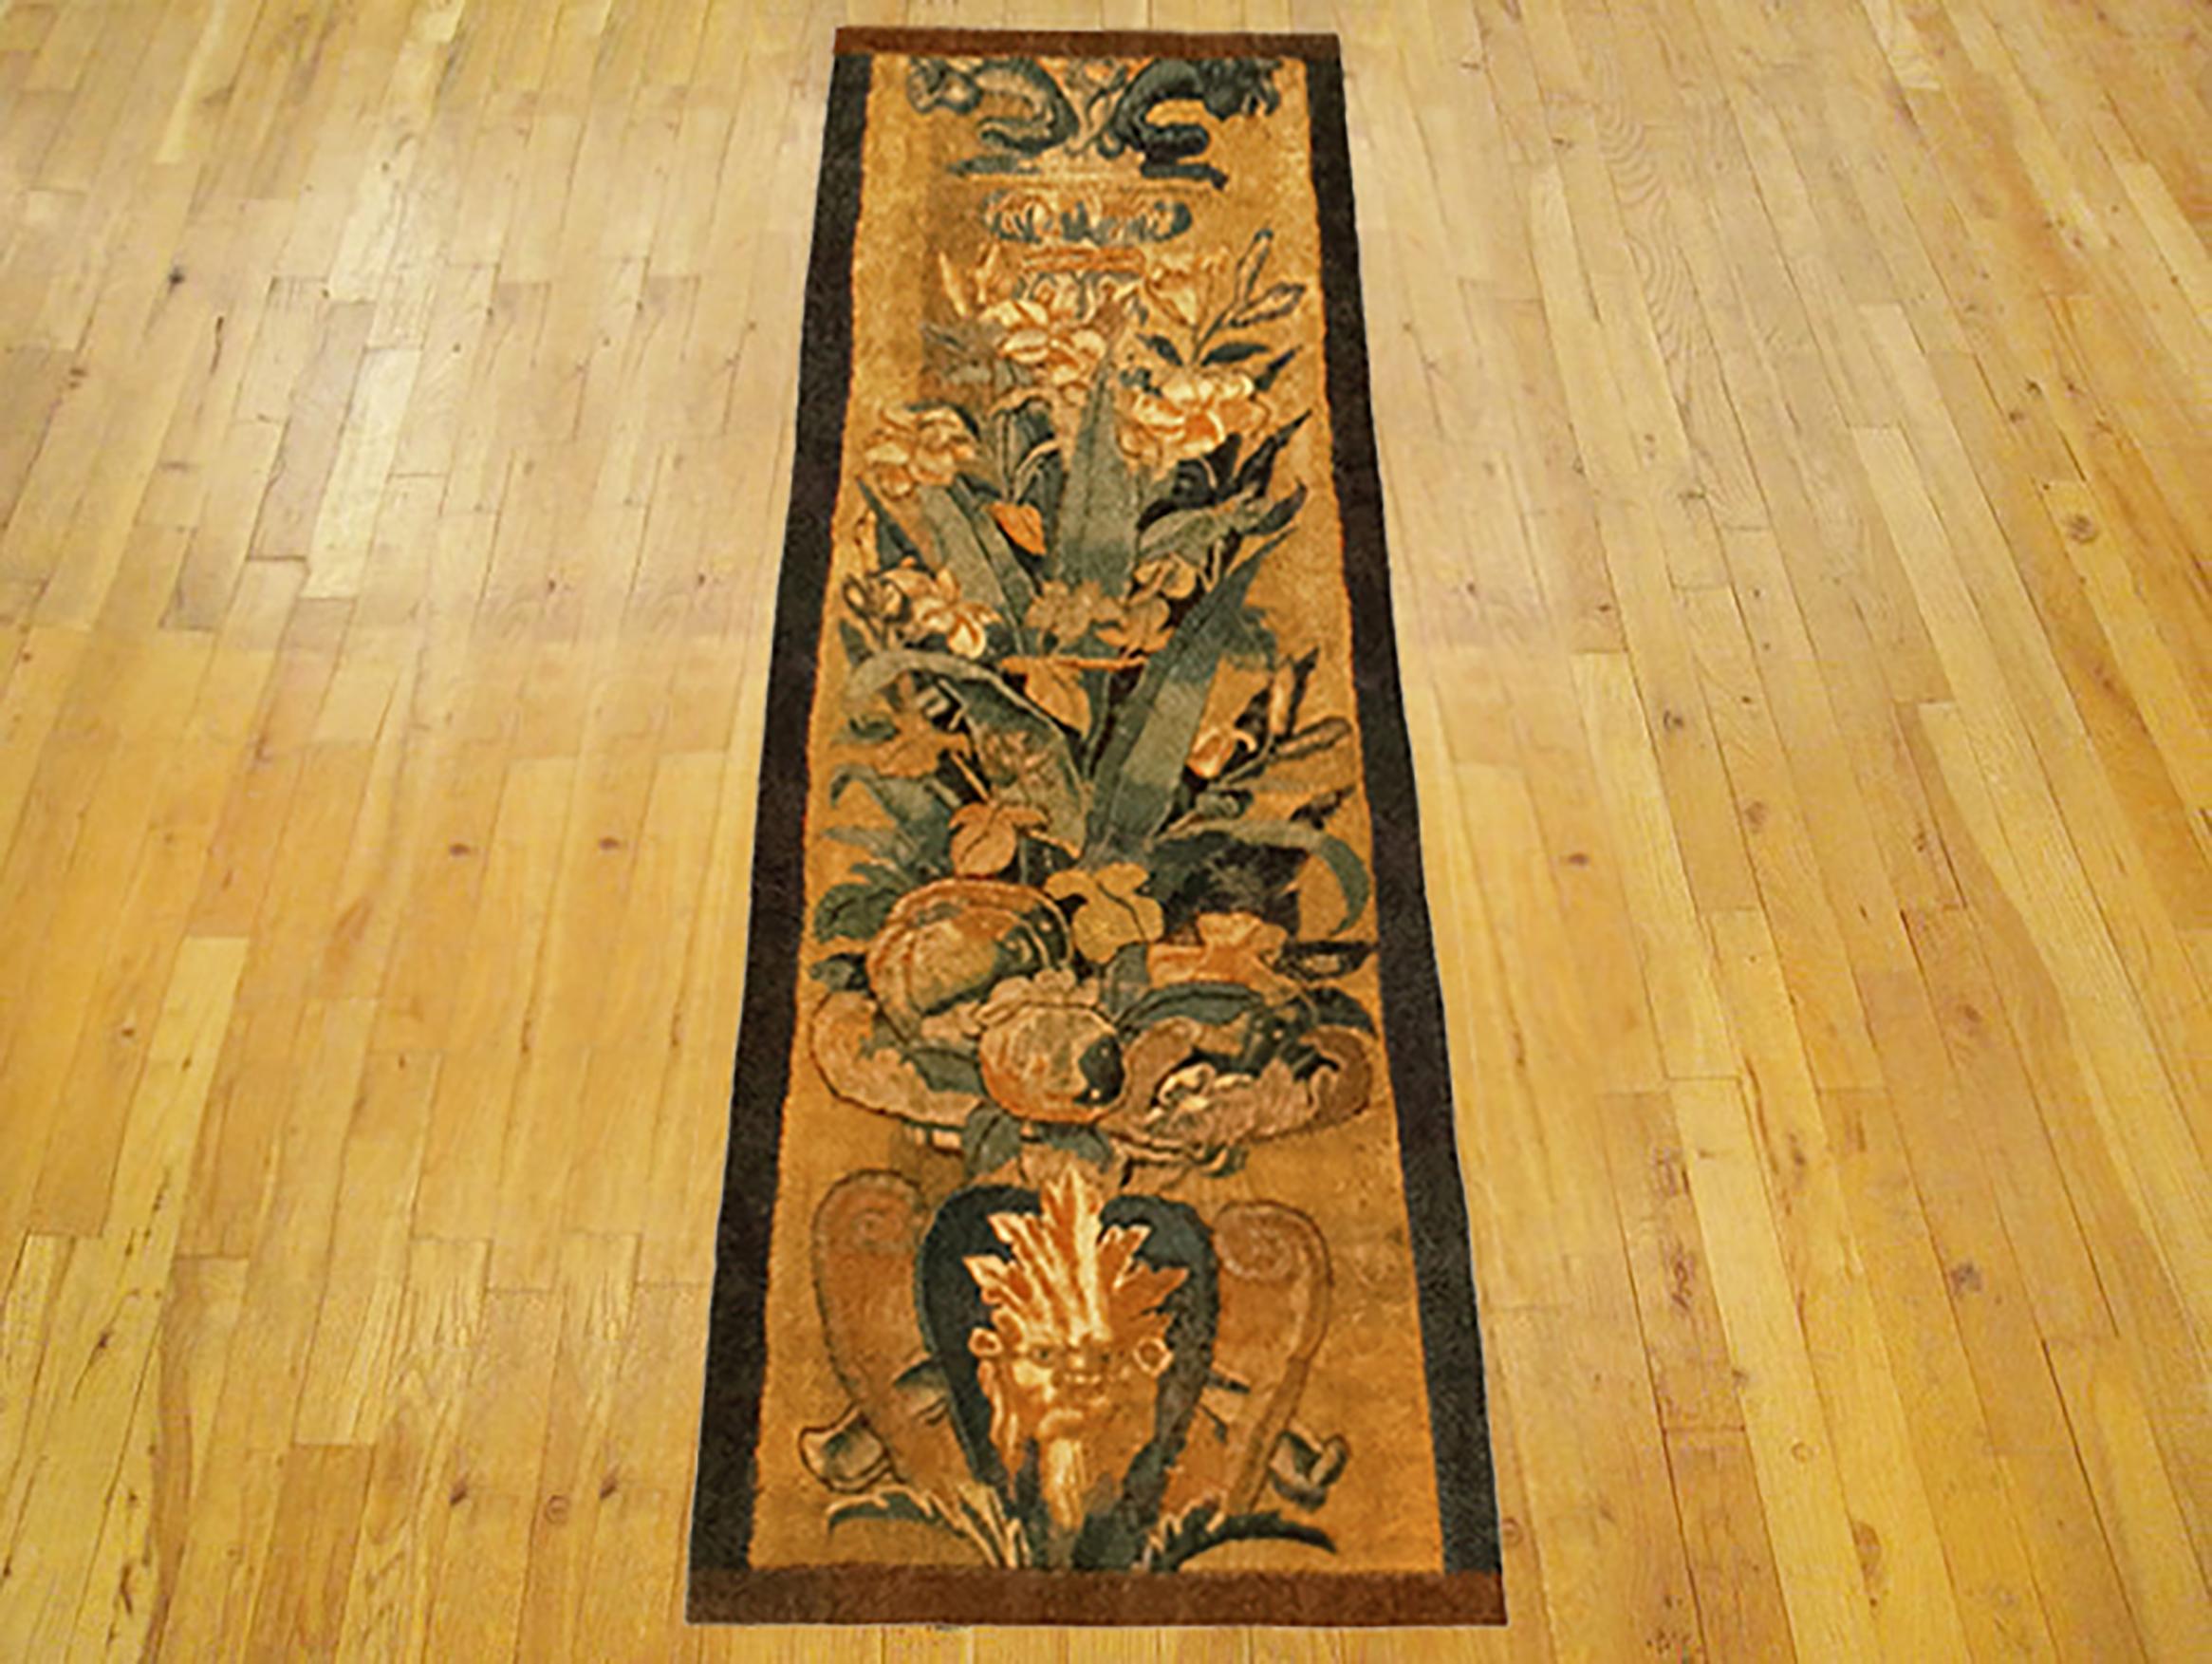 A 16th century Brussels Historical Tapestry panel. This vertically oriented decorative tapestry panel depicts a scrolling foliate design, with a grotesque and a coat of arms at bottom, and with the top of a Roman column at top. The central area is